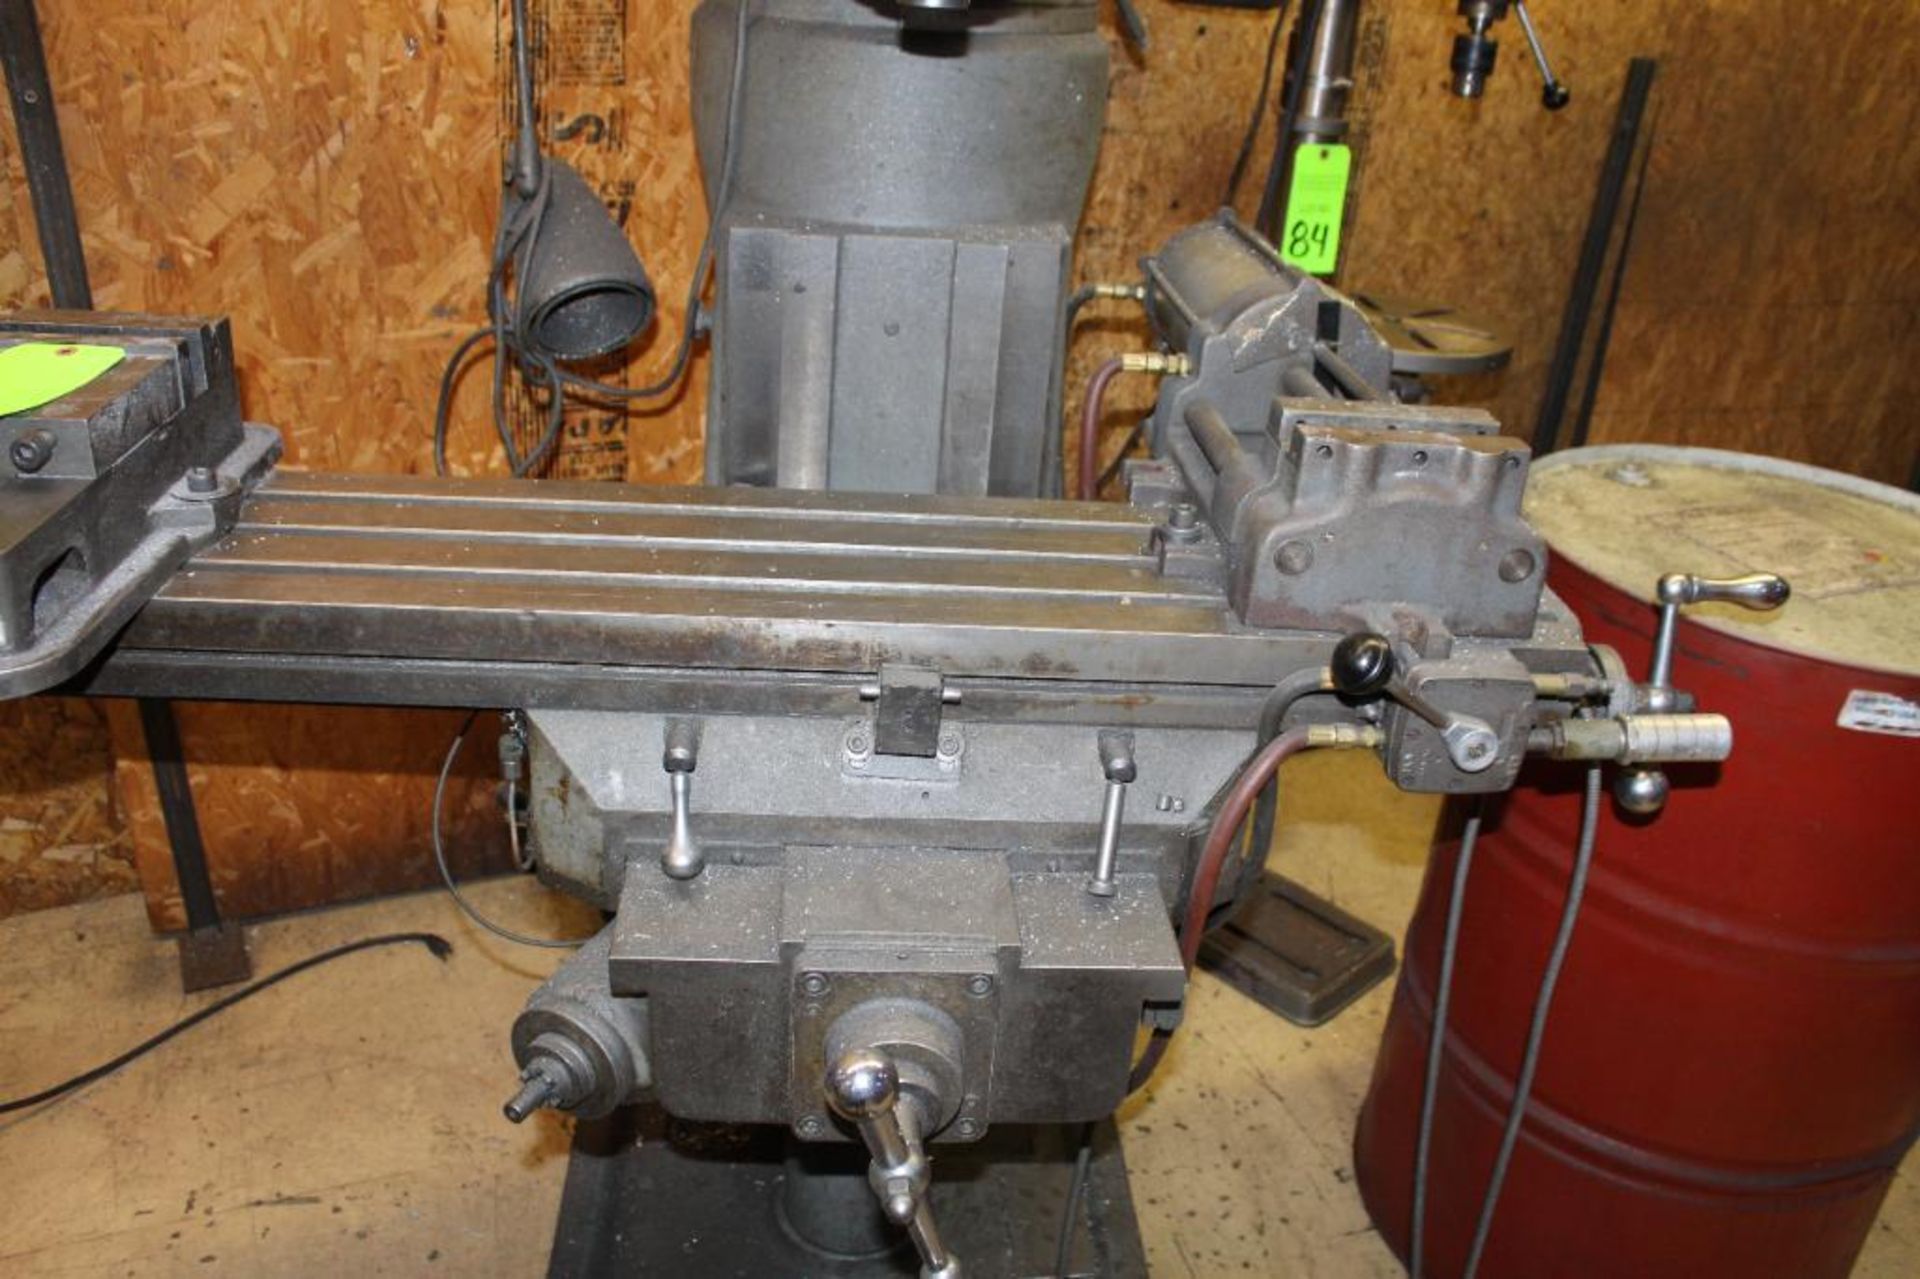 Victor Knee Mill Model CD2VS W/ AcuRite Millmate and 12" Rotary Table Bridgeport News - Image 5 of 10